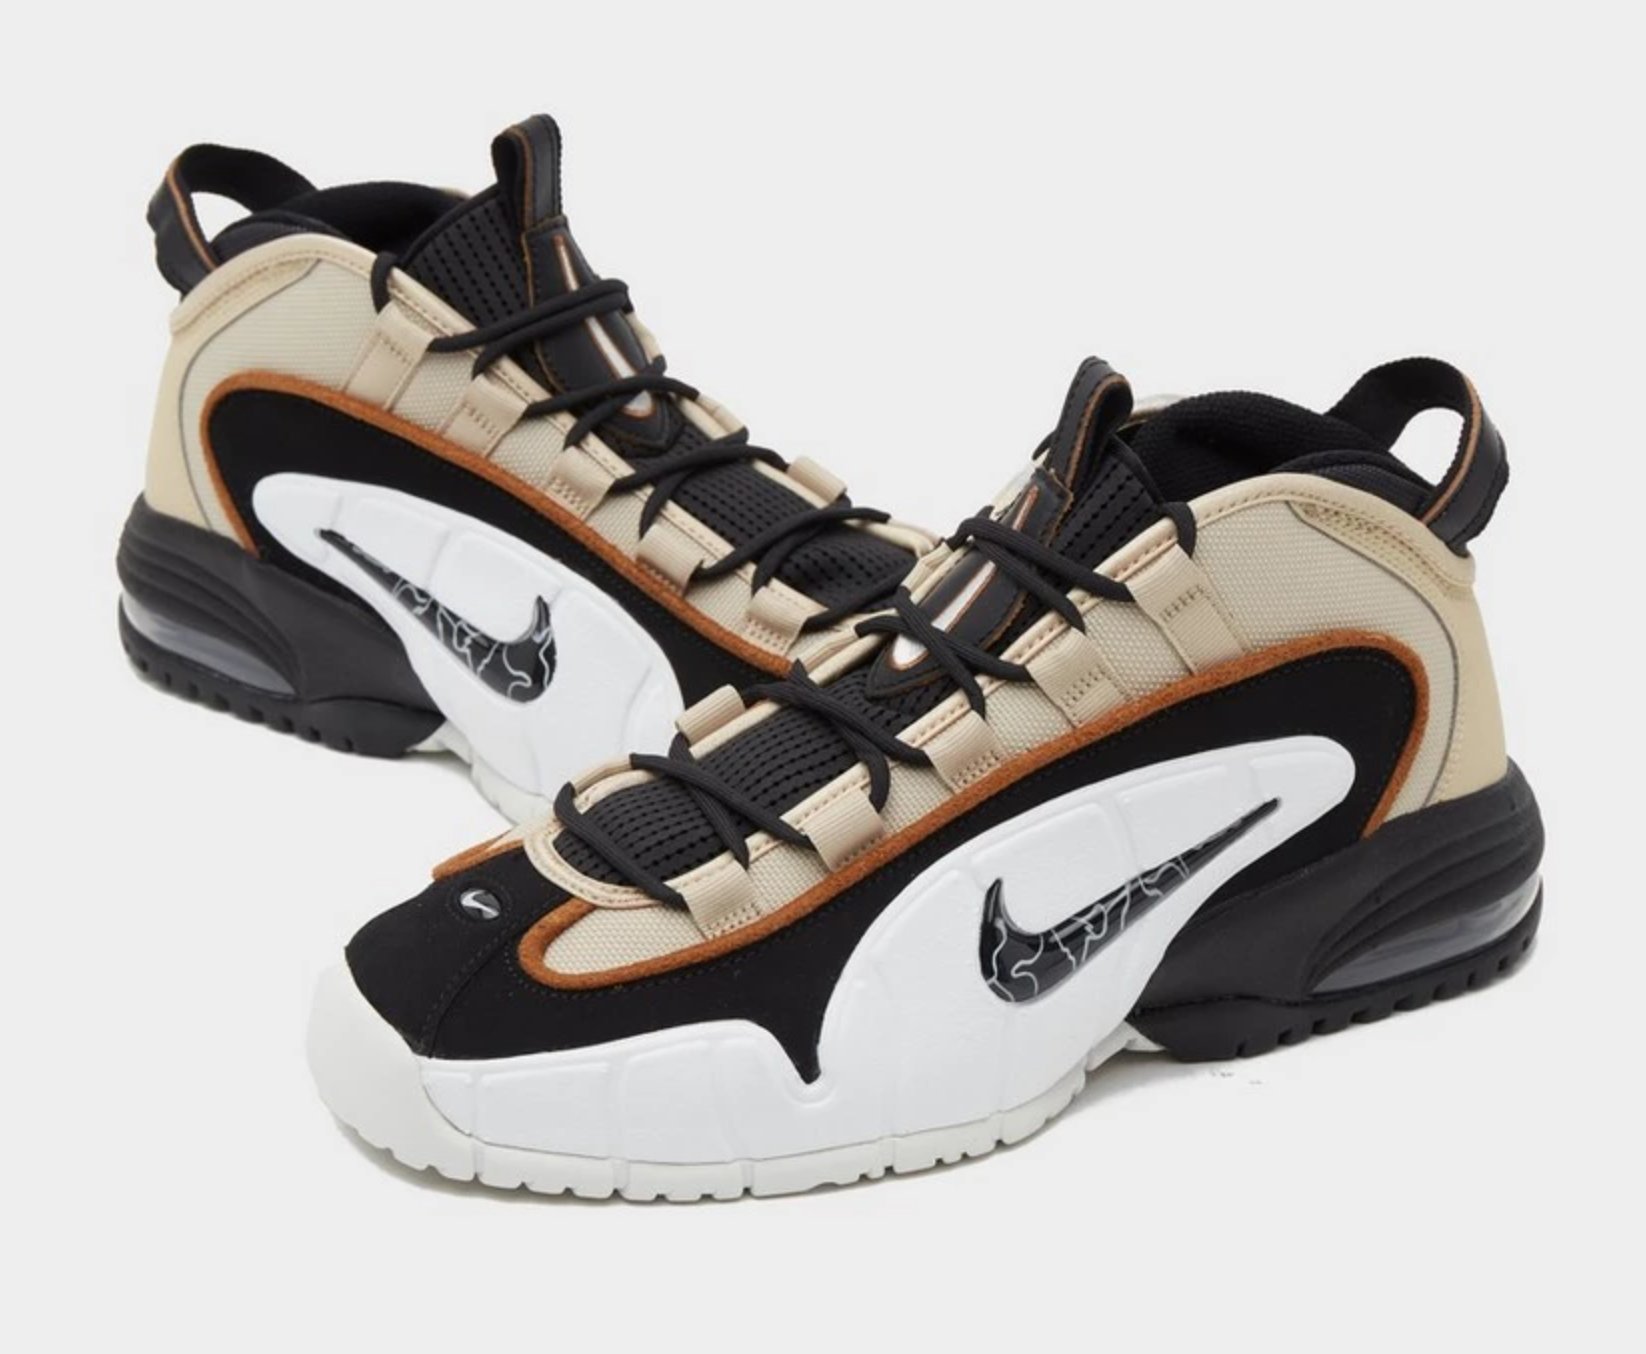 noedels Welvarend trolleybus SOLELINKS on Twitter: "Ad: Dropped via Size? Nike Air Max Penny 1 'Rattan'  =&gt; https://t.co/LgjRq98fuT checkout via CC or PayPal  https://t.co/2CSkccsqXz" / Twitter